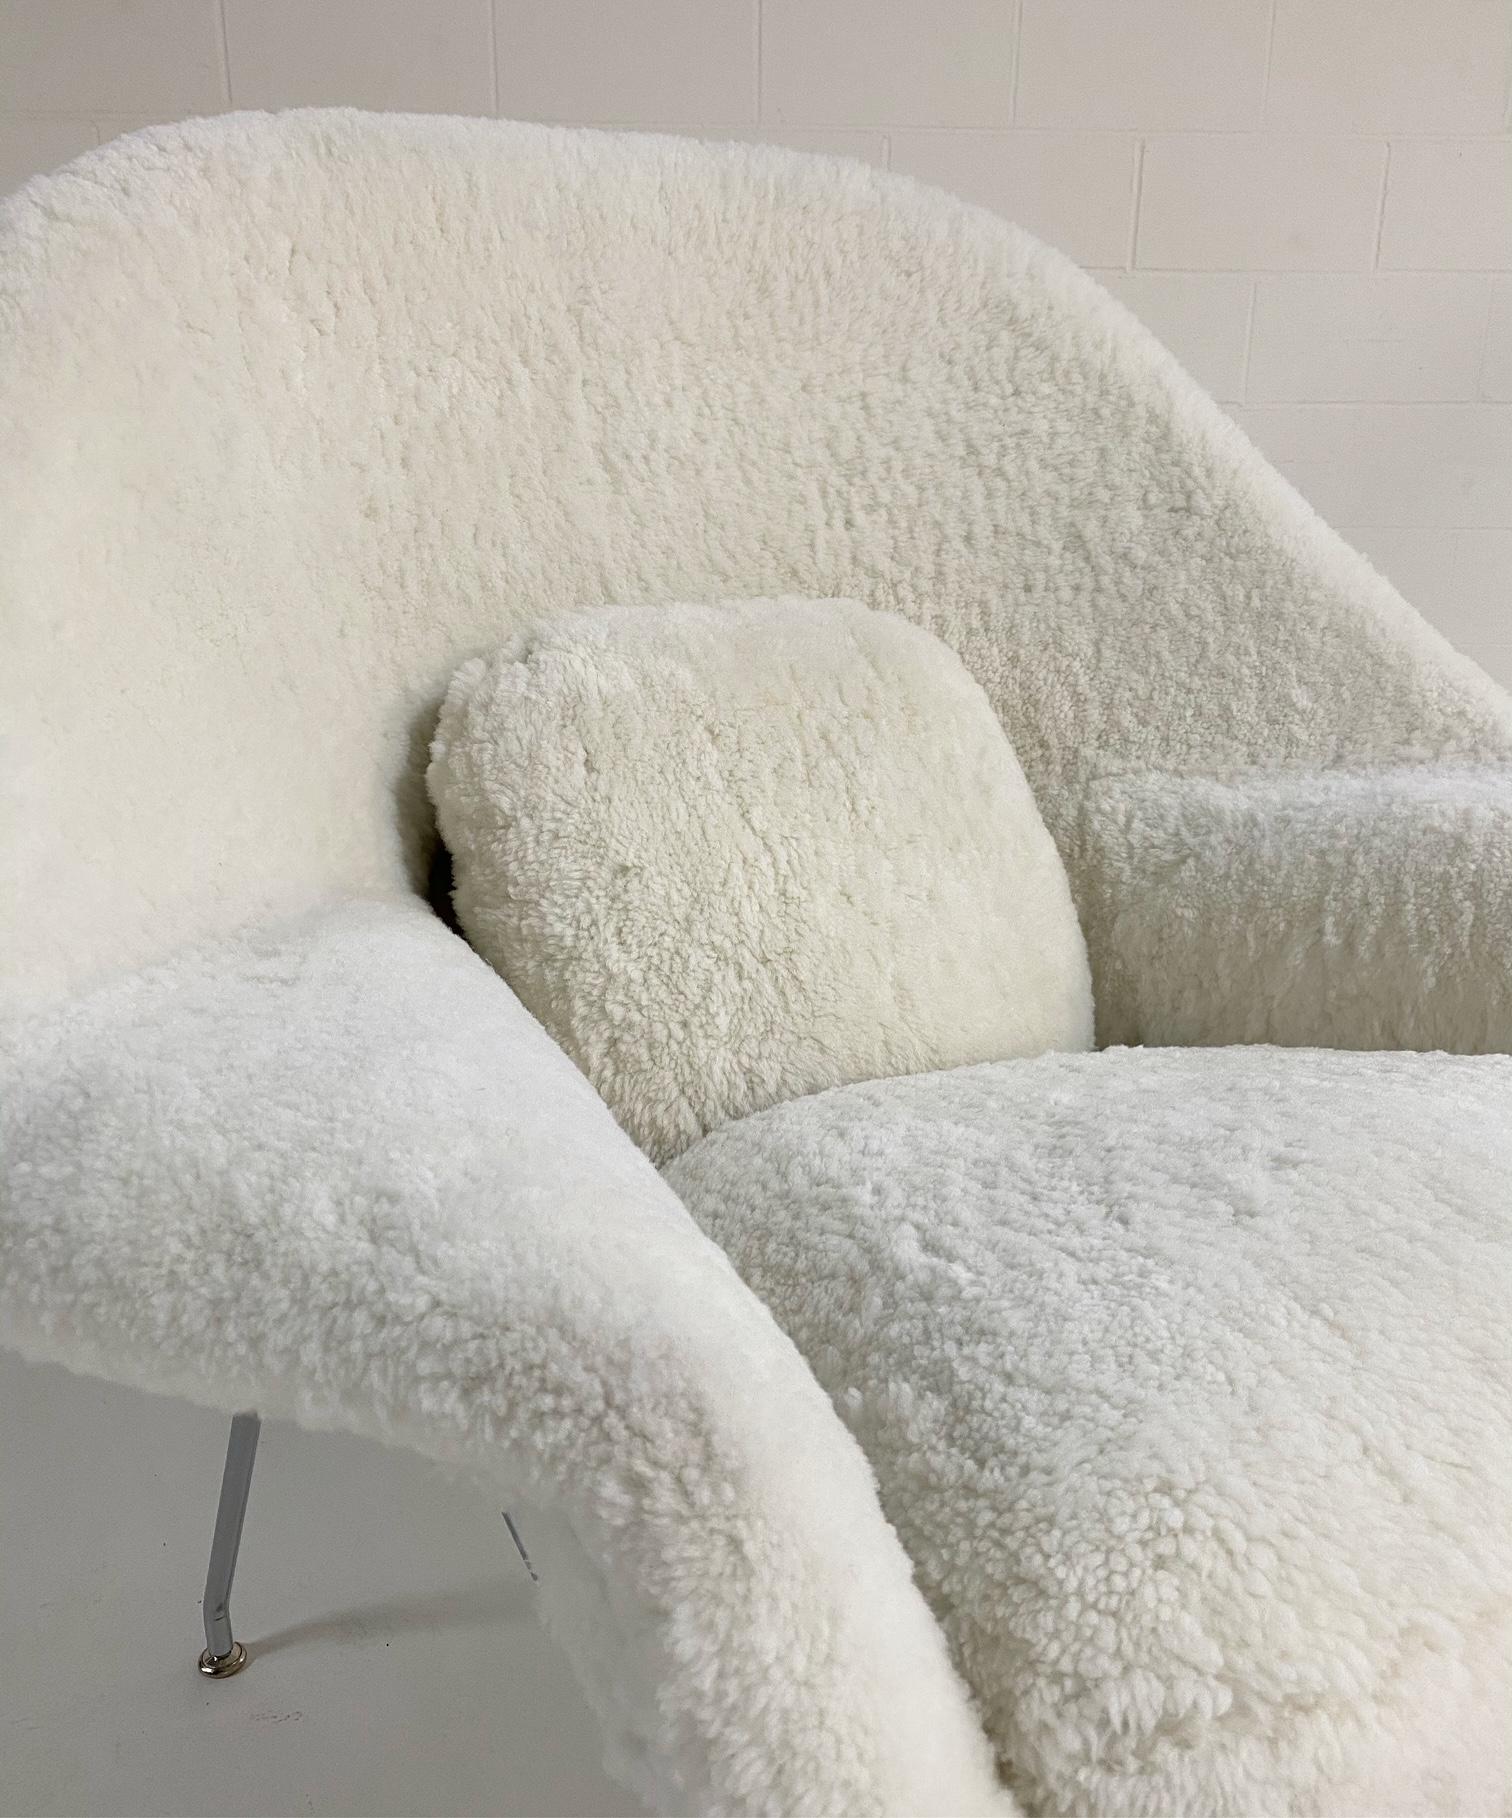 We have an incredible collection of vintage chairs and design icons waiting for a new life. Our upcylced womb chairs are some of our most popular designs. This womb chair will be made to order with the finest Australian sheepskins. Please note, as